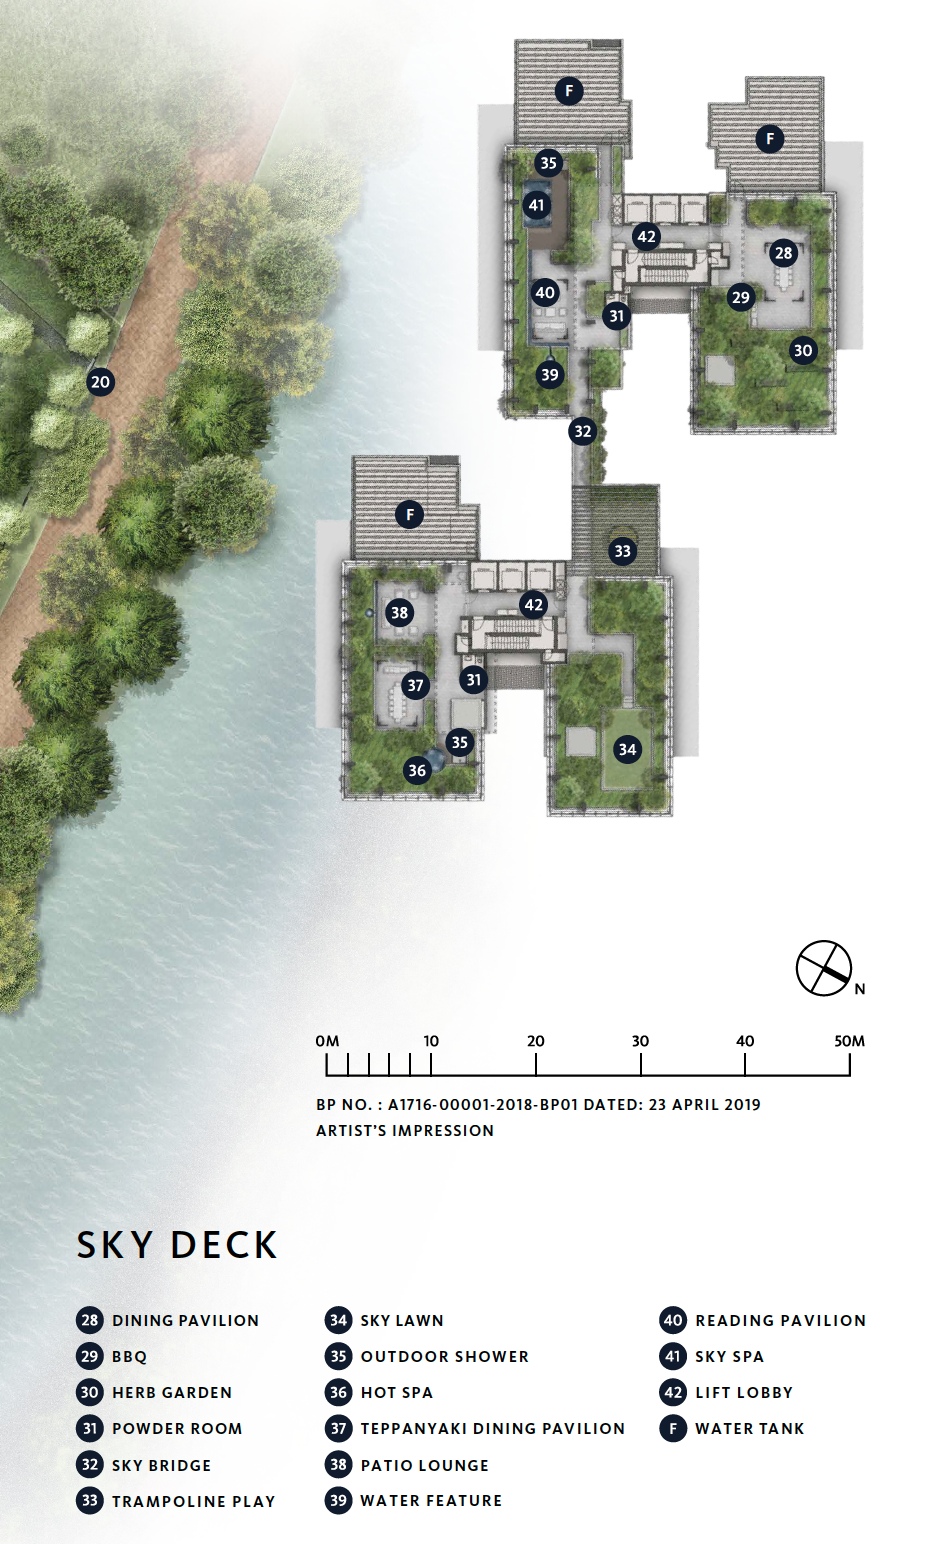 Riviere Rootop Facilities Site Plan Propertylimbrothers.png